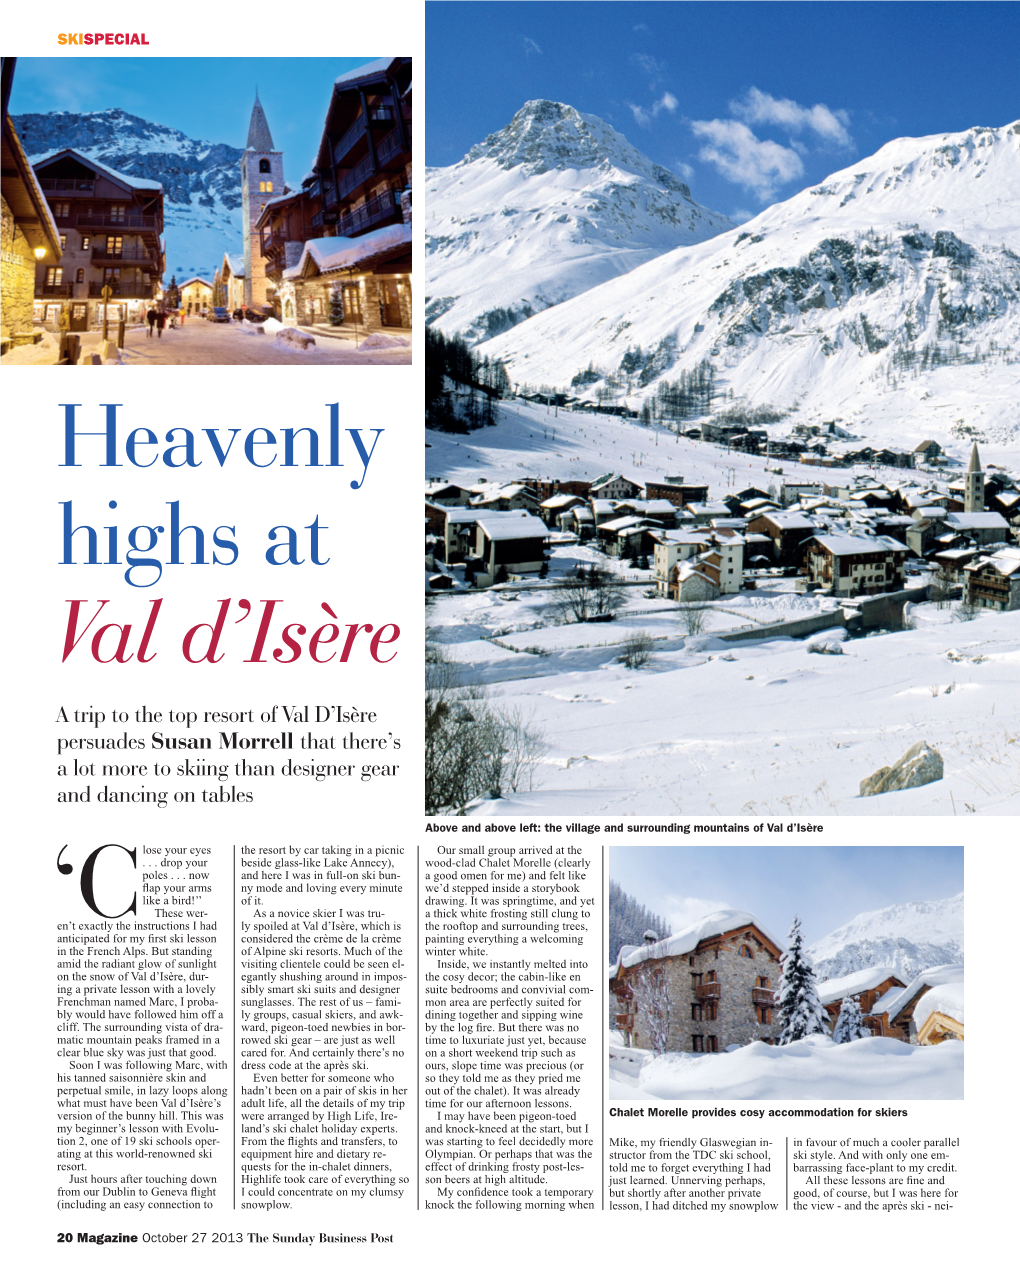 A Trip to the Top Resort of Val D'isère Persuades Susan Morrell That